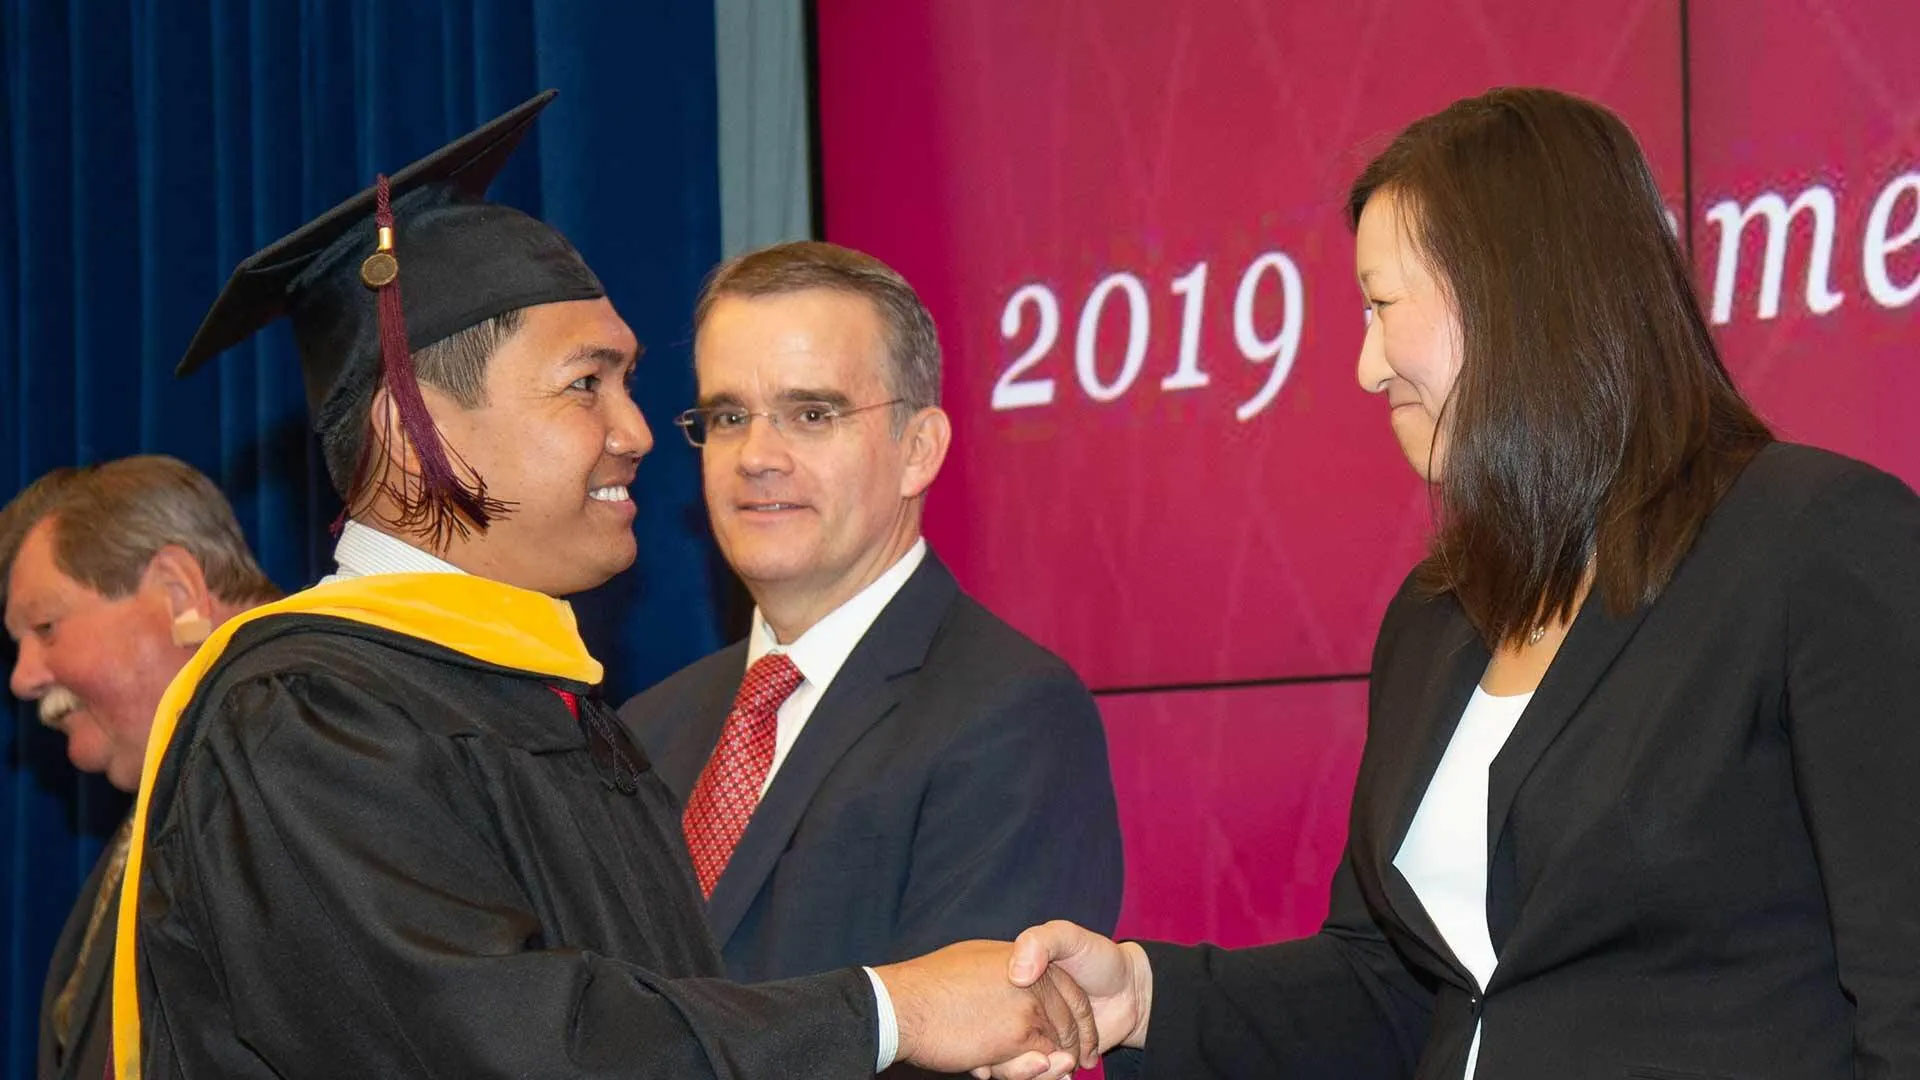 Graduate shakes hands with professors